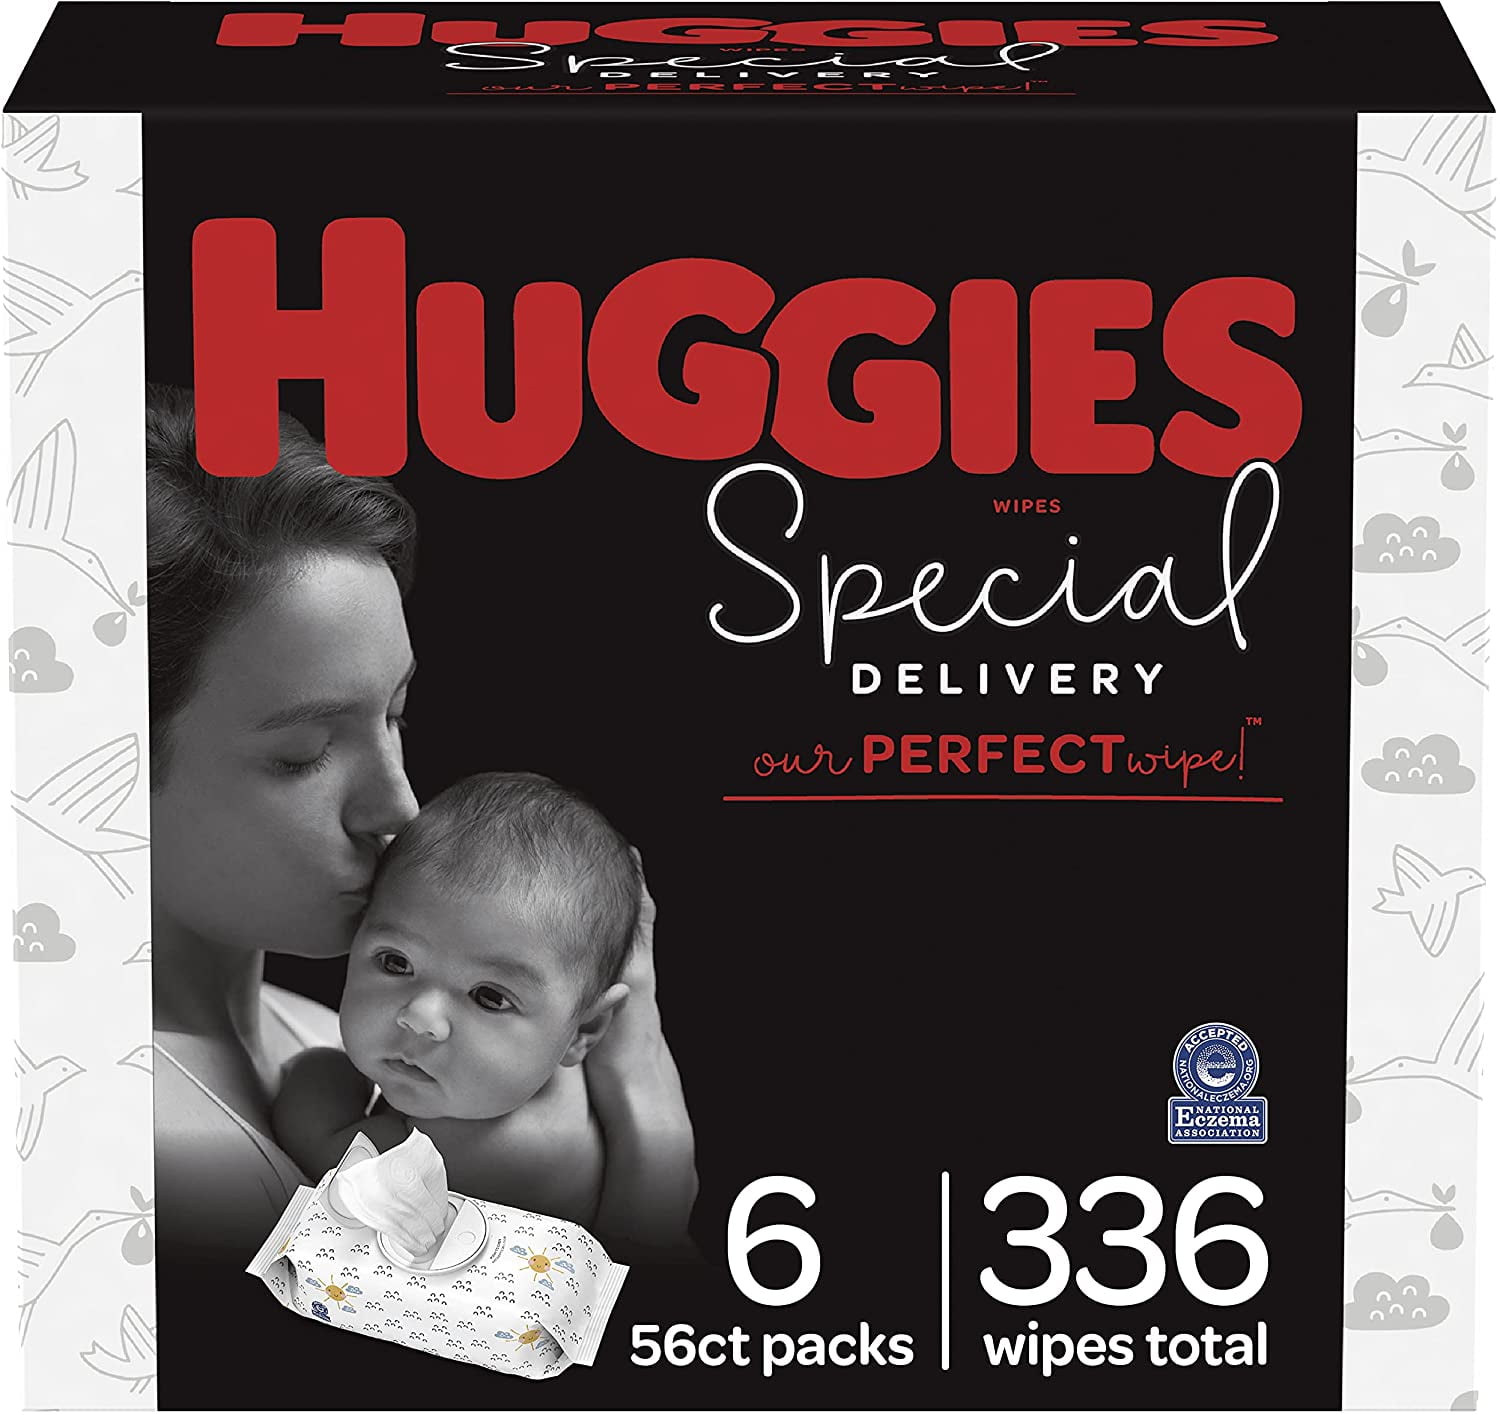 huggies special delivery wipes vs water wipes